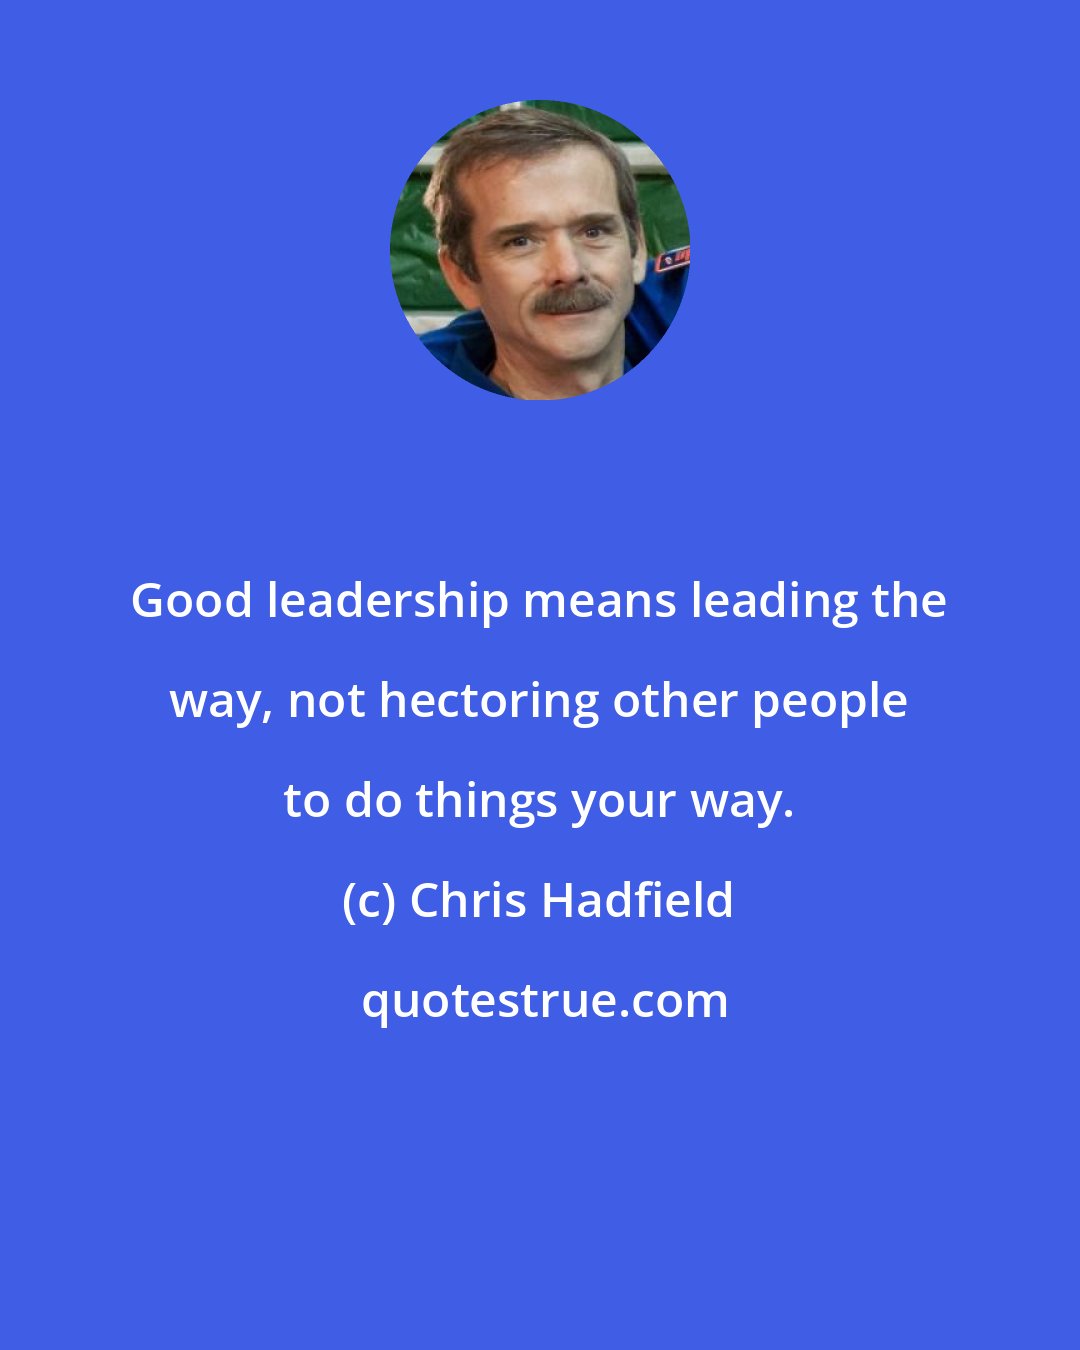 Chris Hadfield: Good leadership means leading the way, not hectoring other people to do things your way.